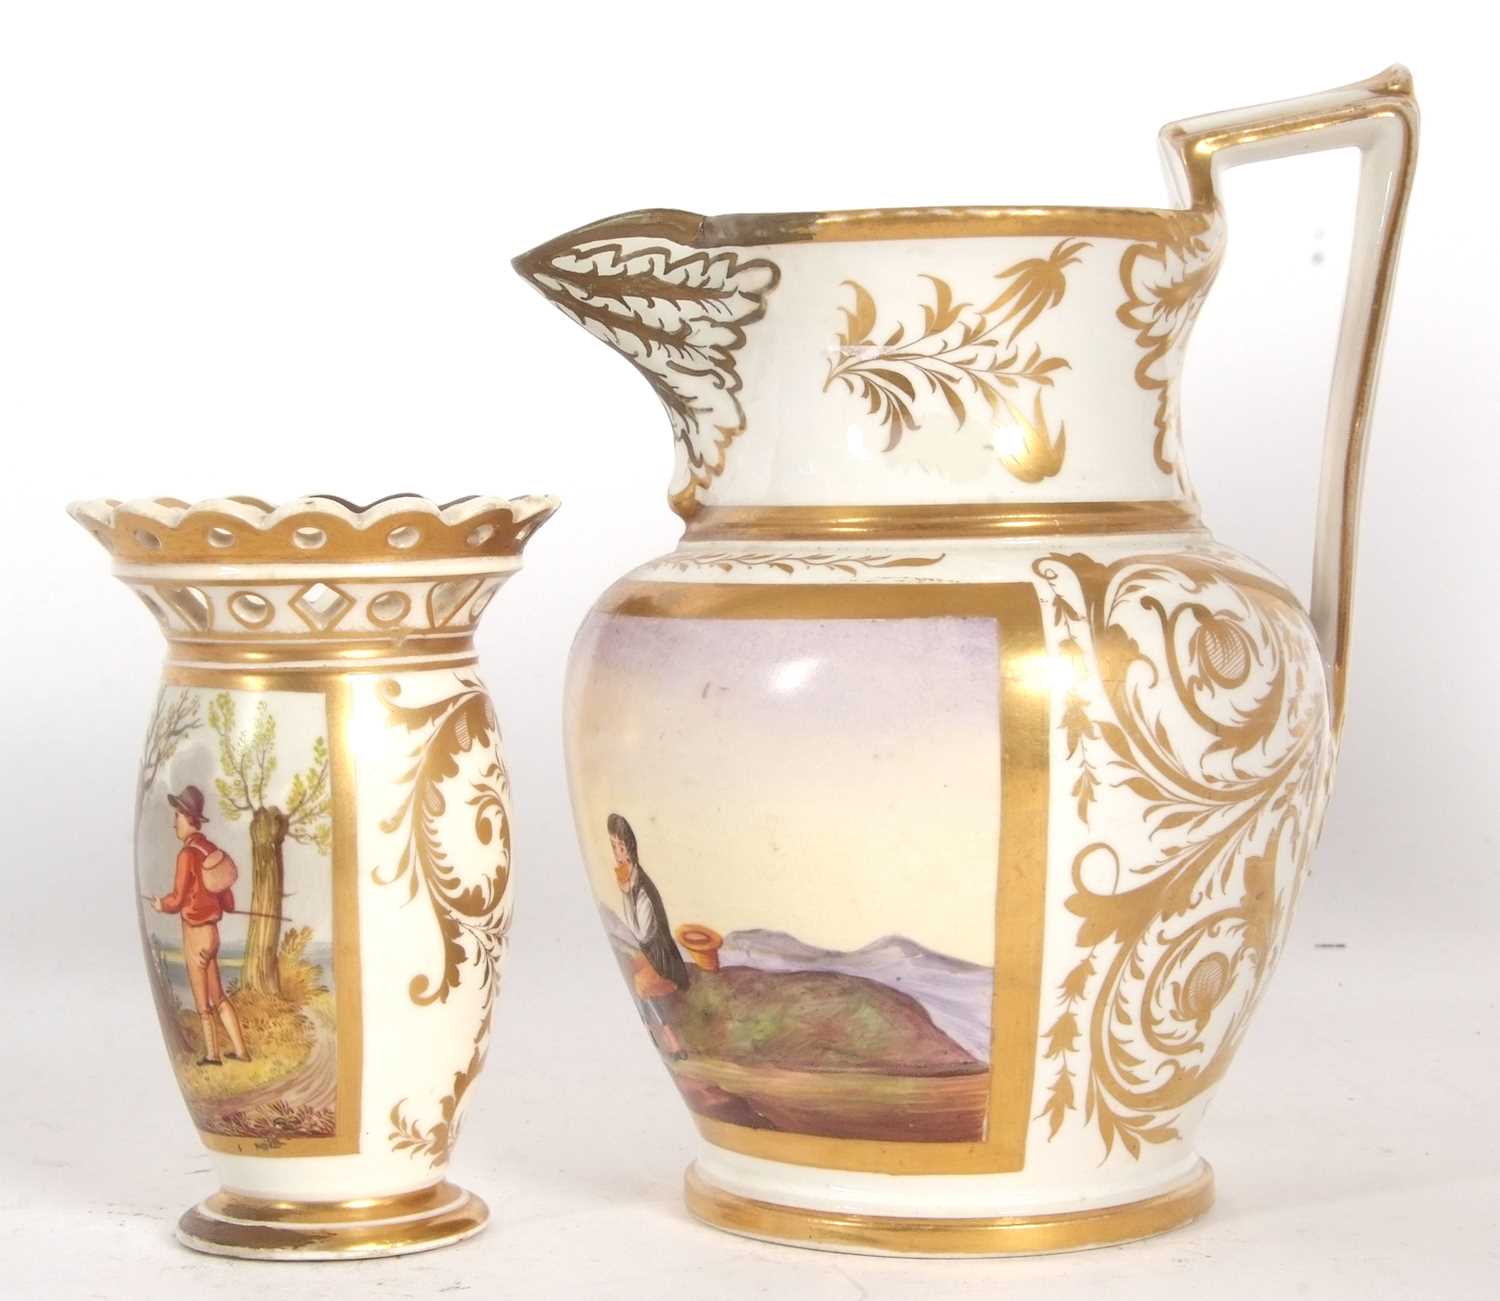 Early 19th Century jug painted with a pastoral scene of figures in a landscape with guilded floral - Image 5 of 6